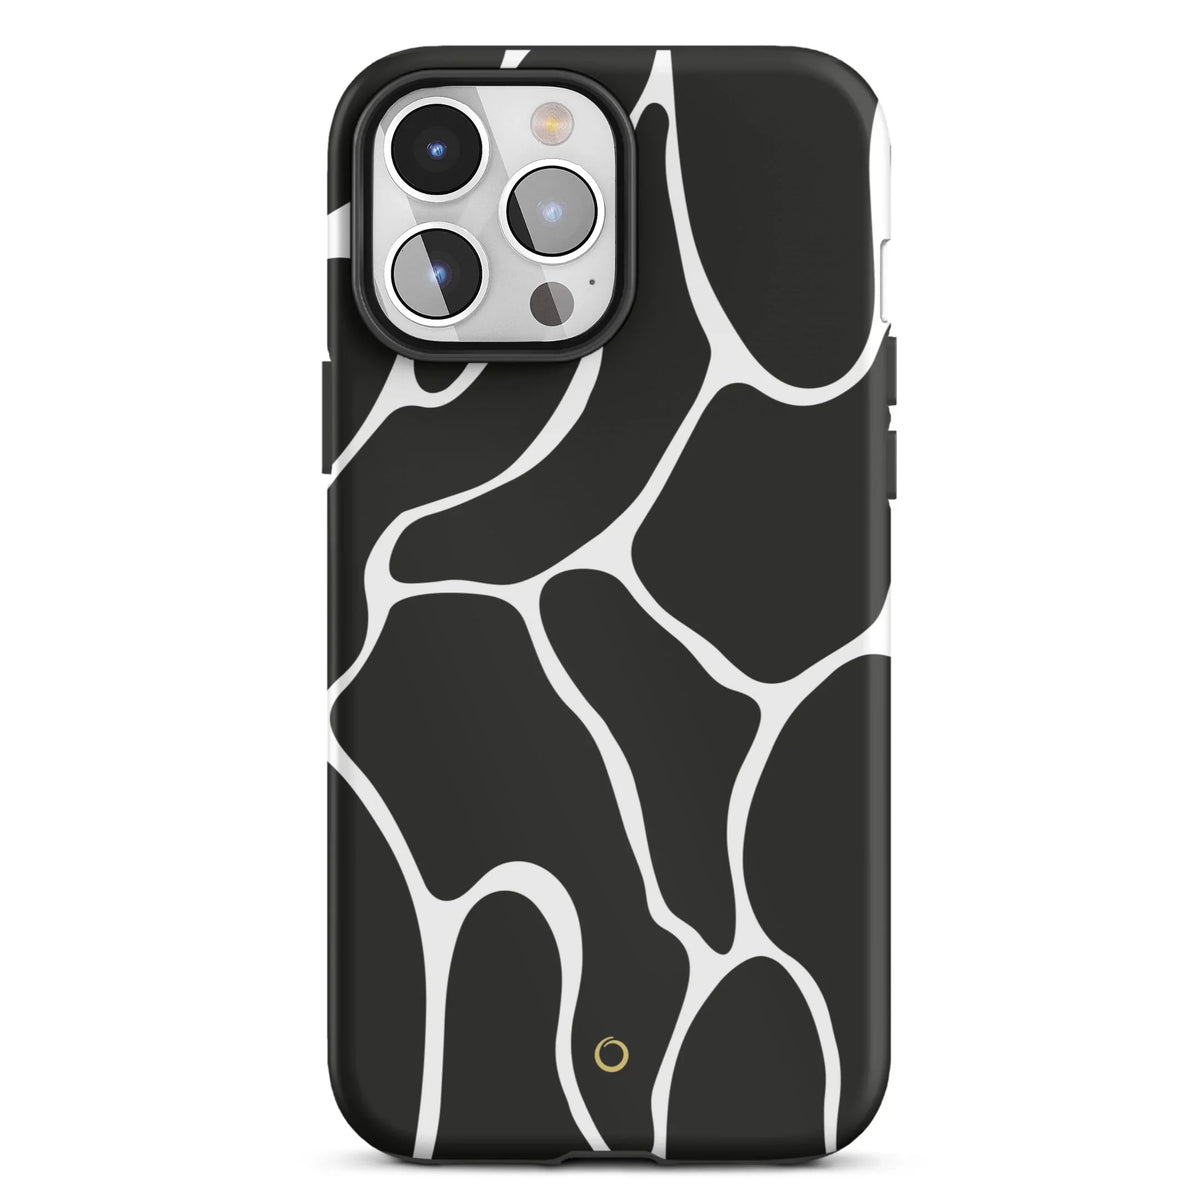 Wavy White Lines iPhone Case - Select a Device